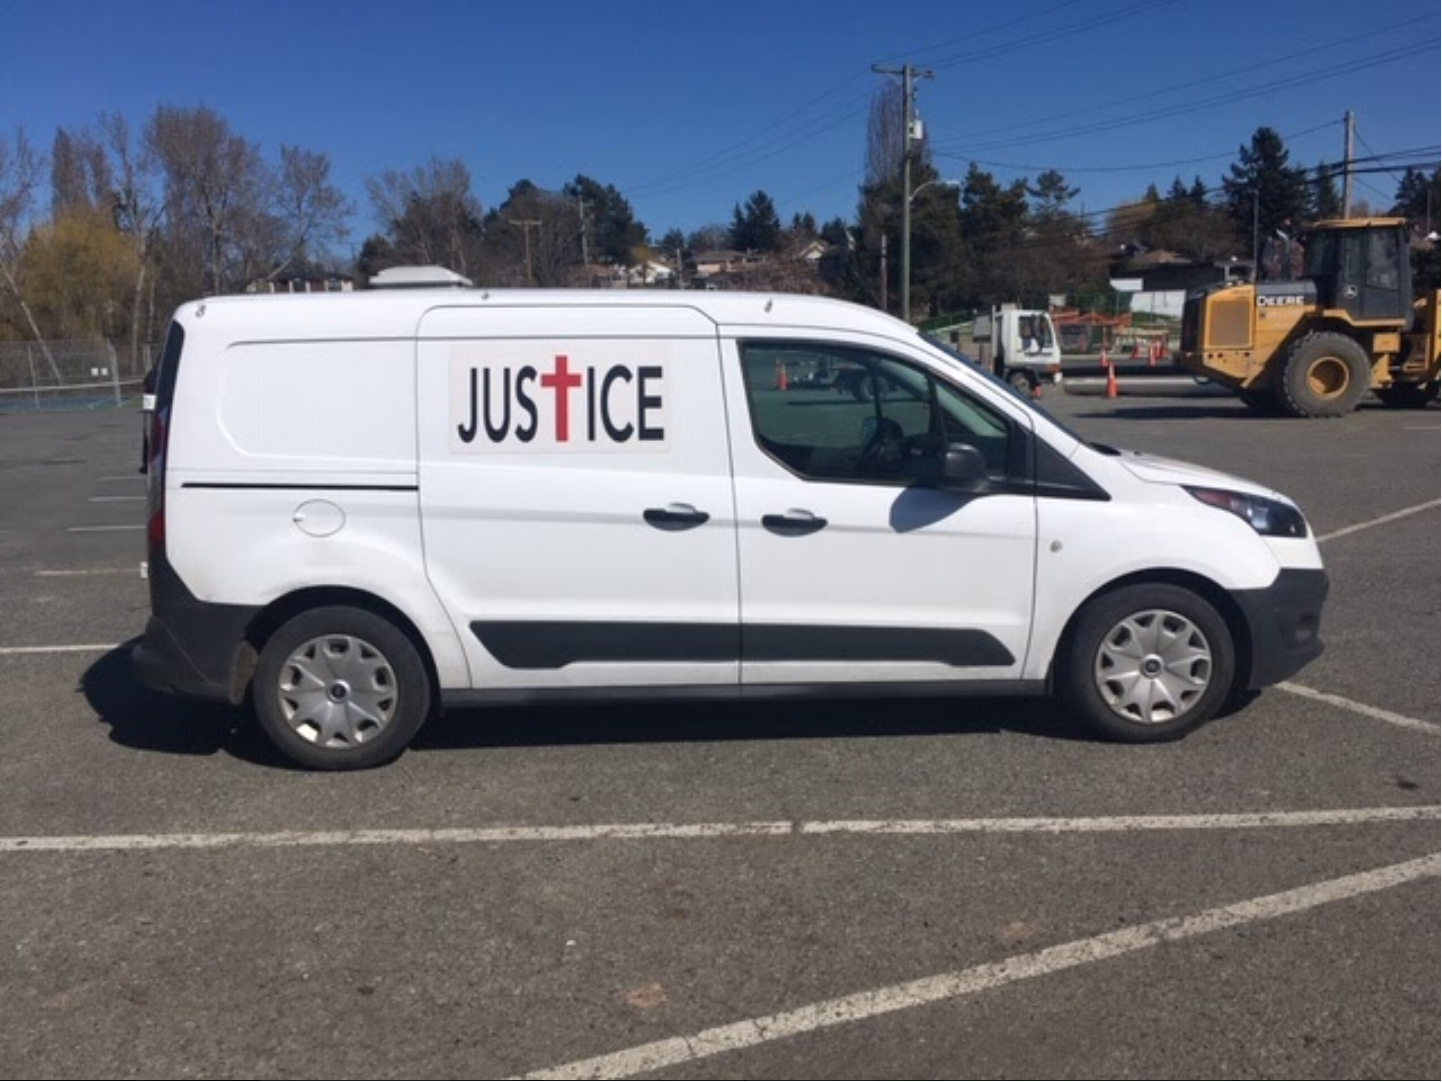 Justice Van delivers supplies directly to Victoria’s street community